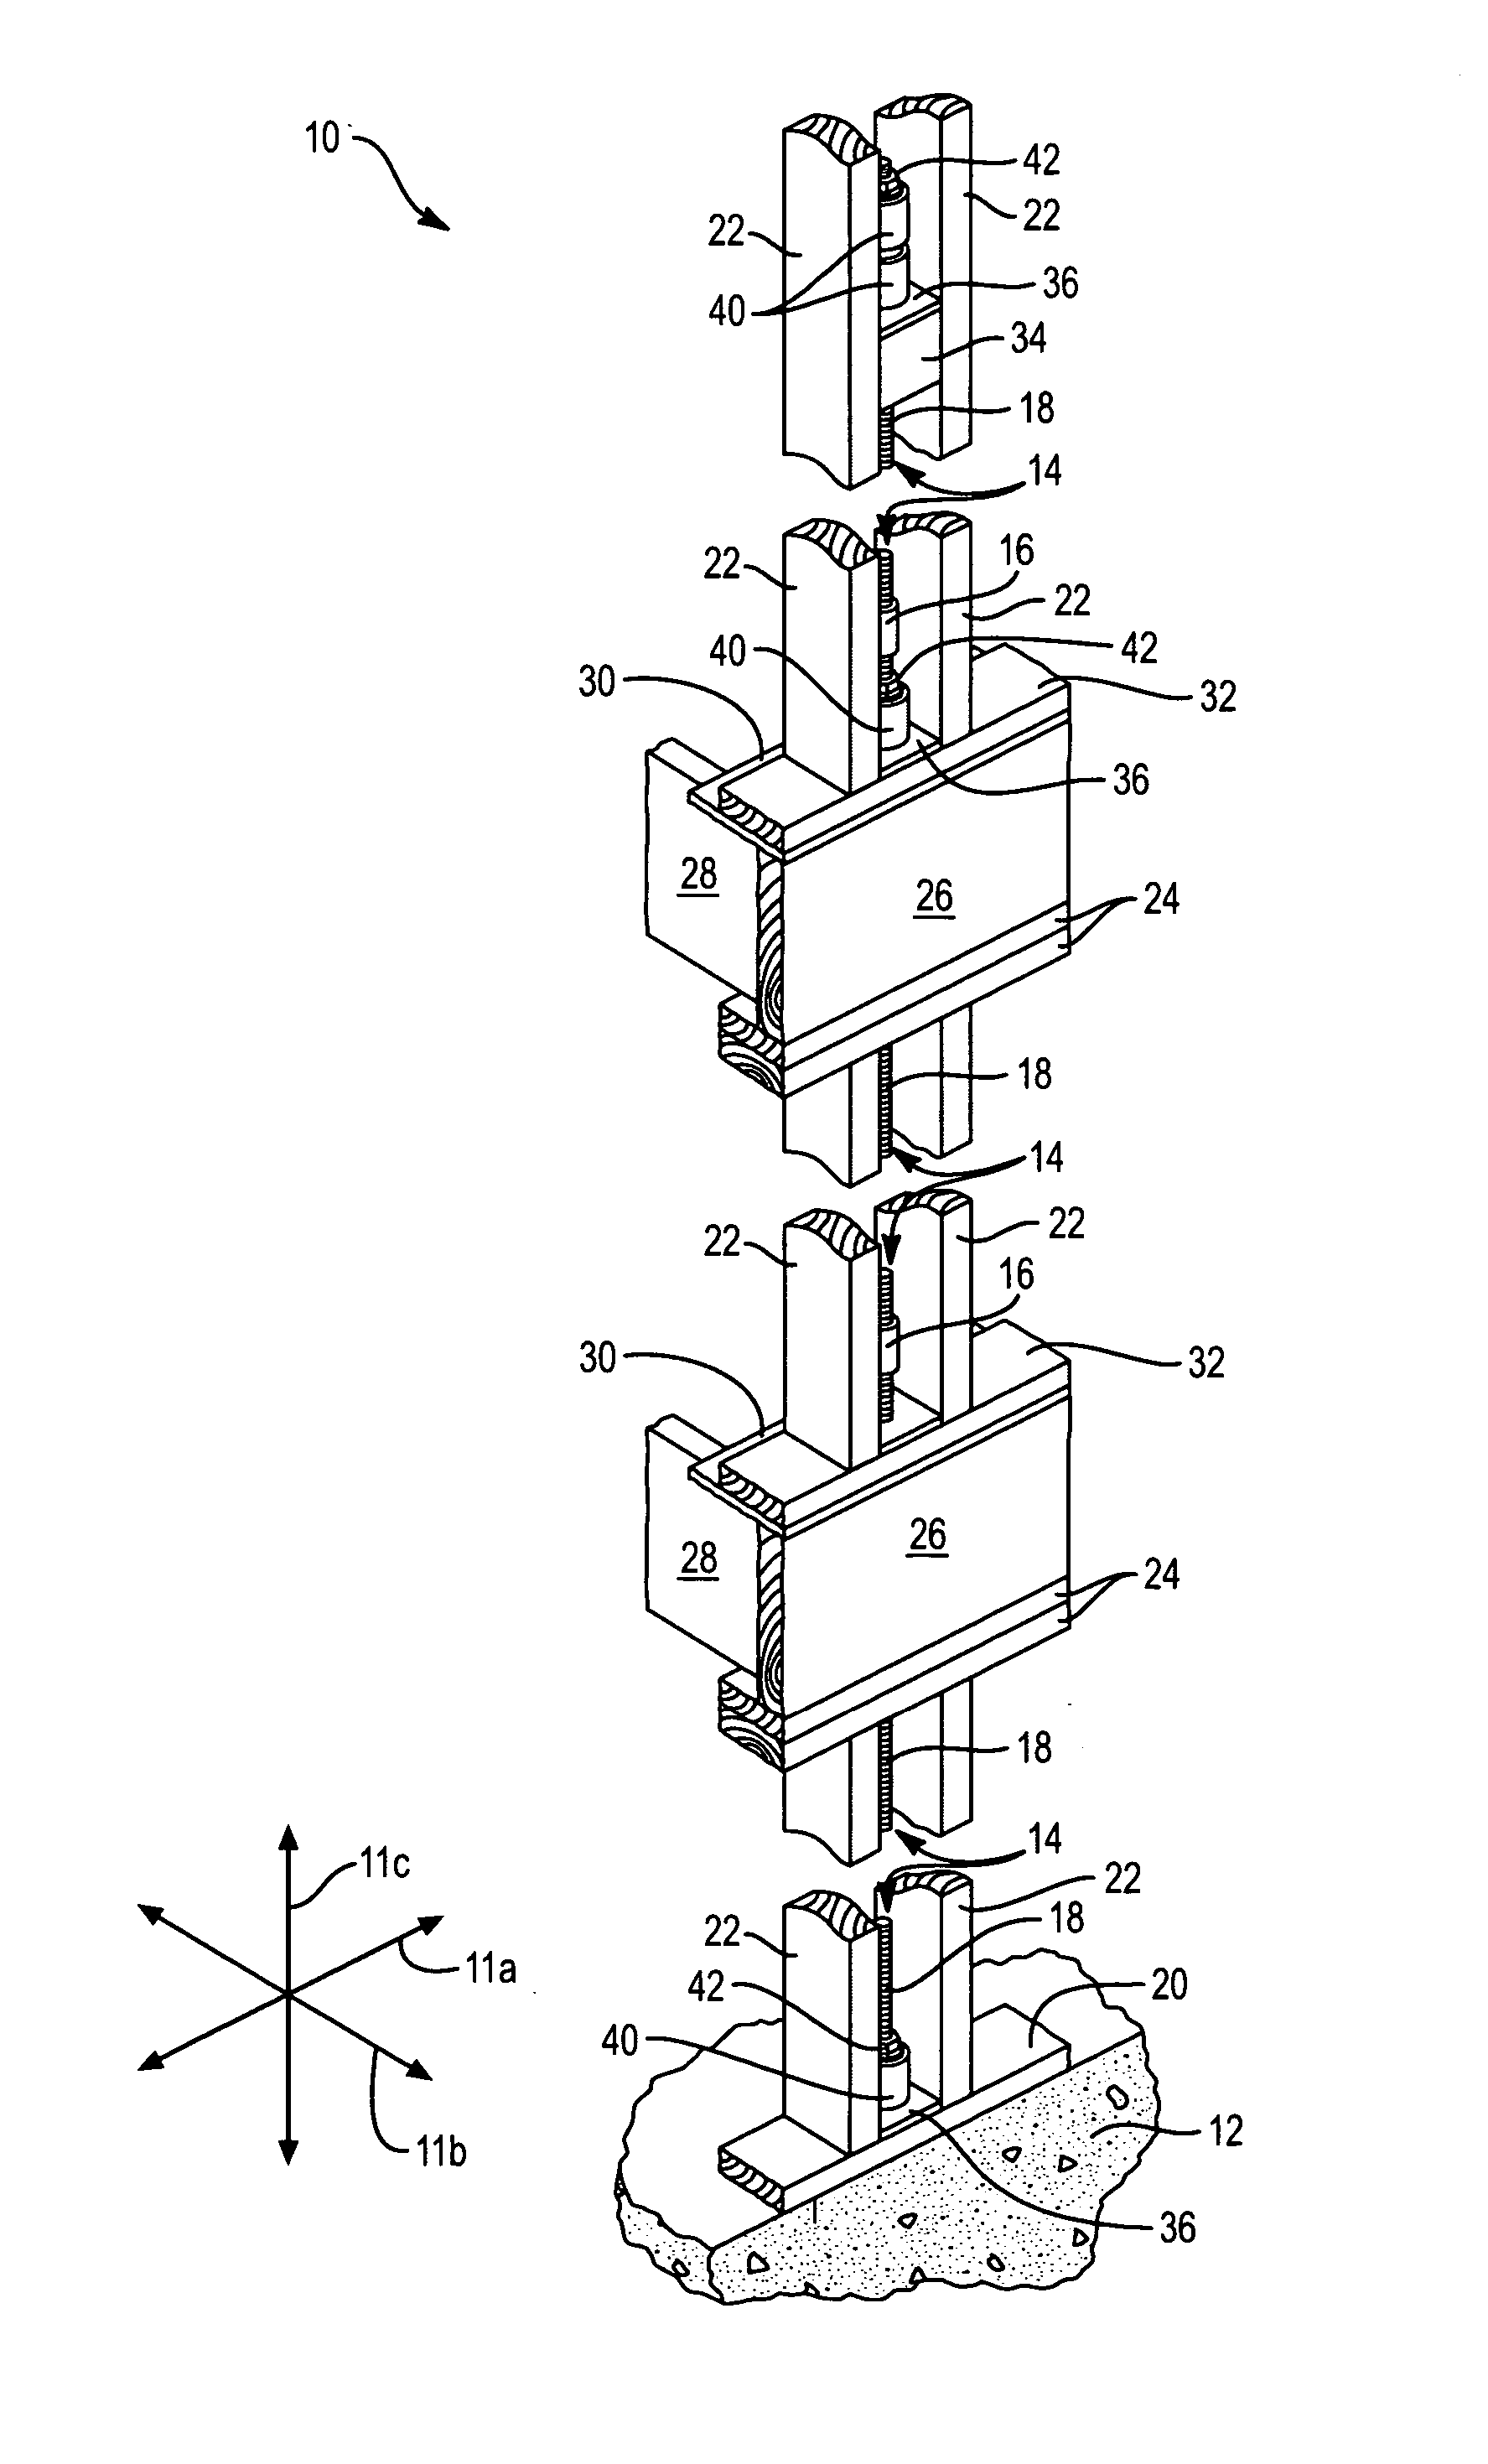 Continuously threaded hold-down system